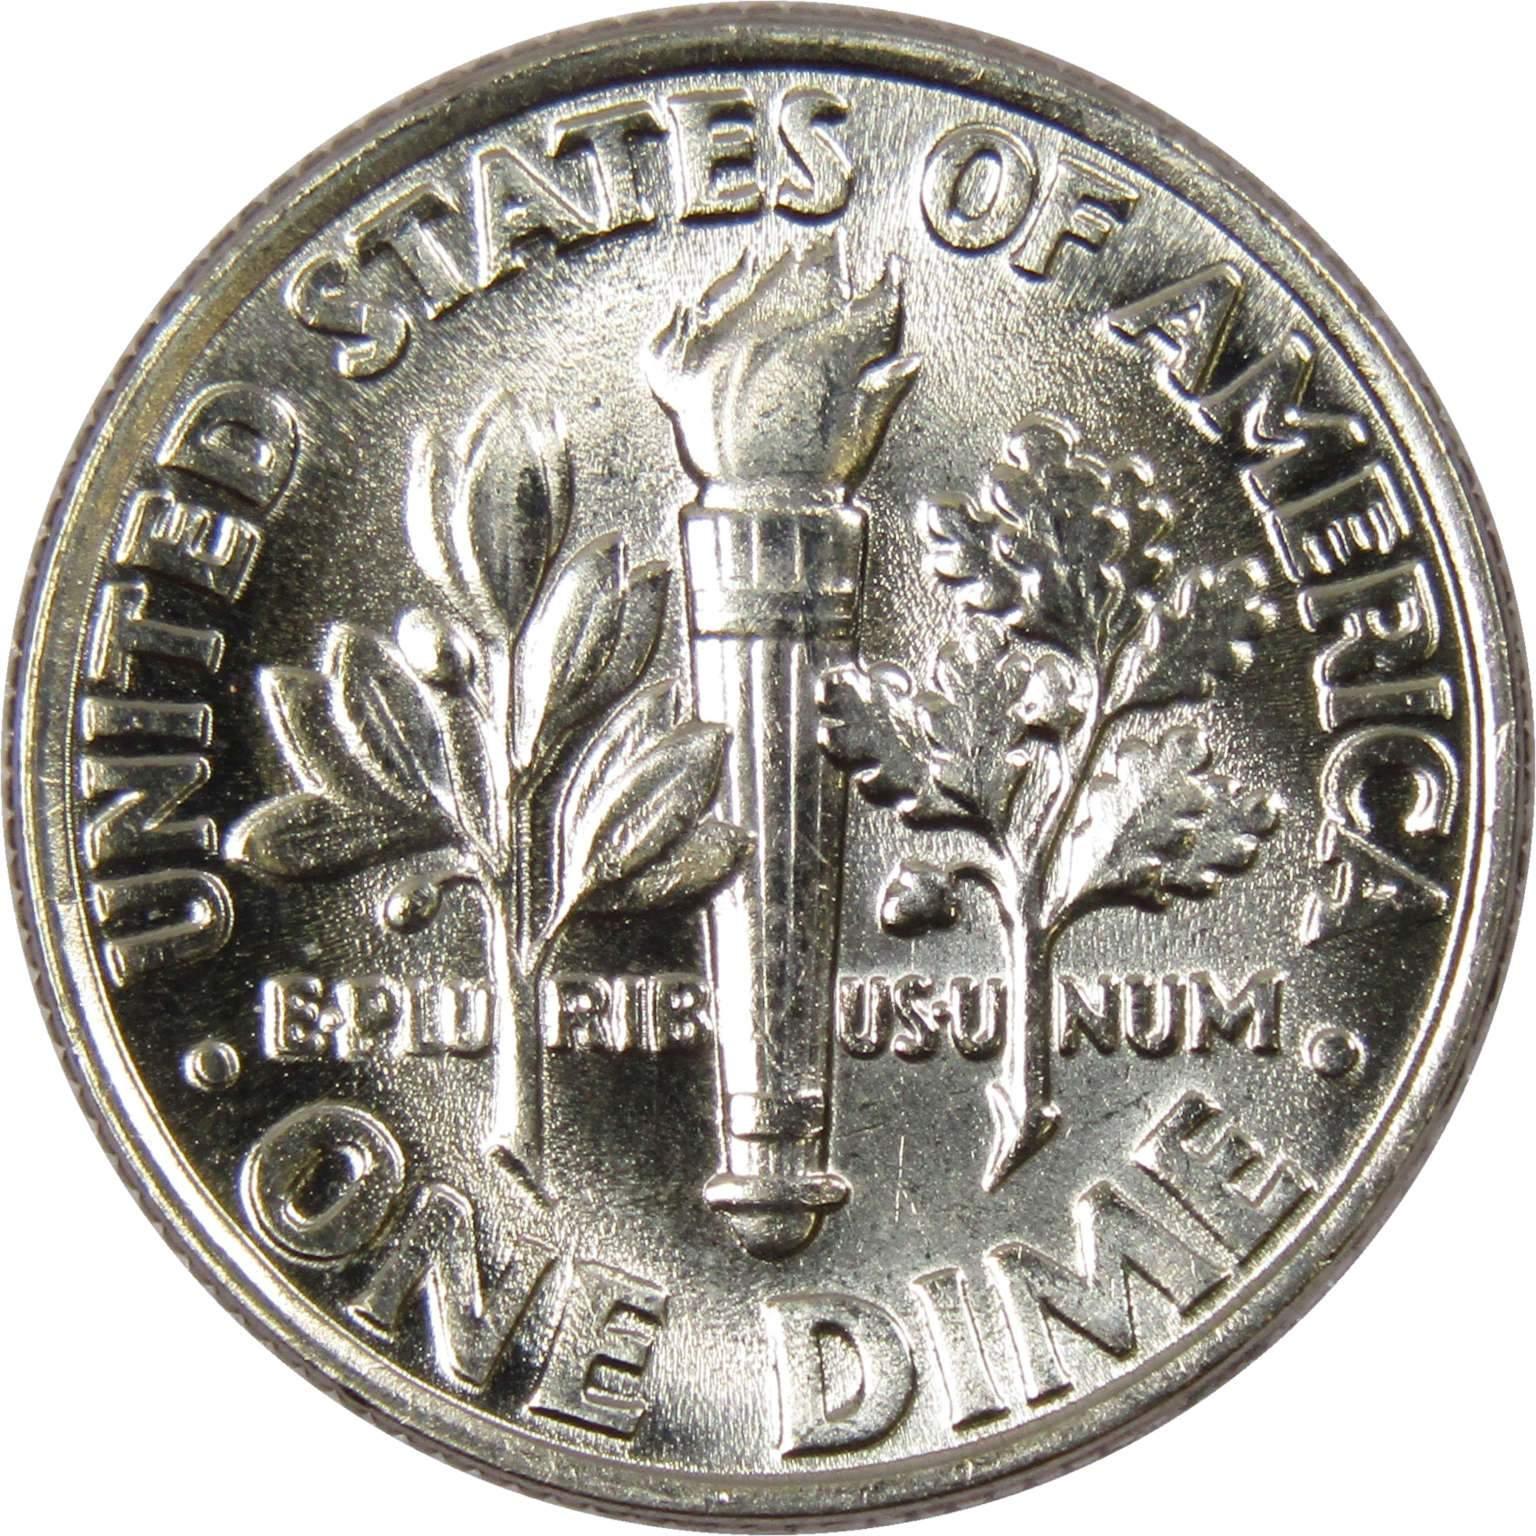 1992 D Roosevelt Dime BU Uncirculated Mint State 10c US Coin Collectible